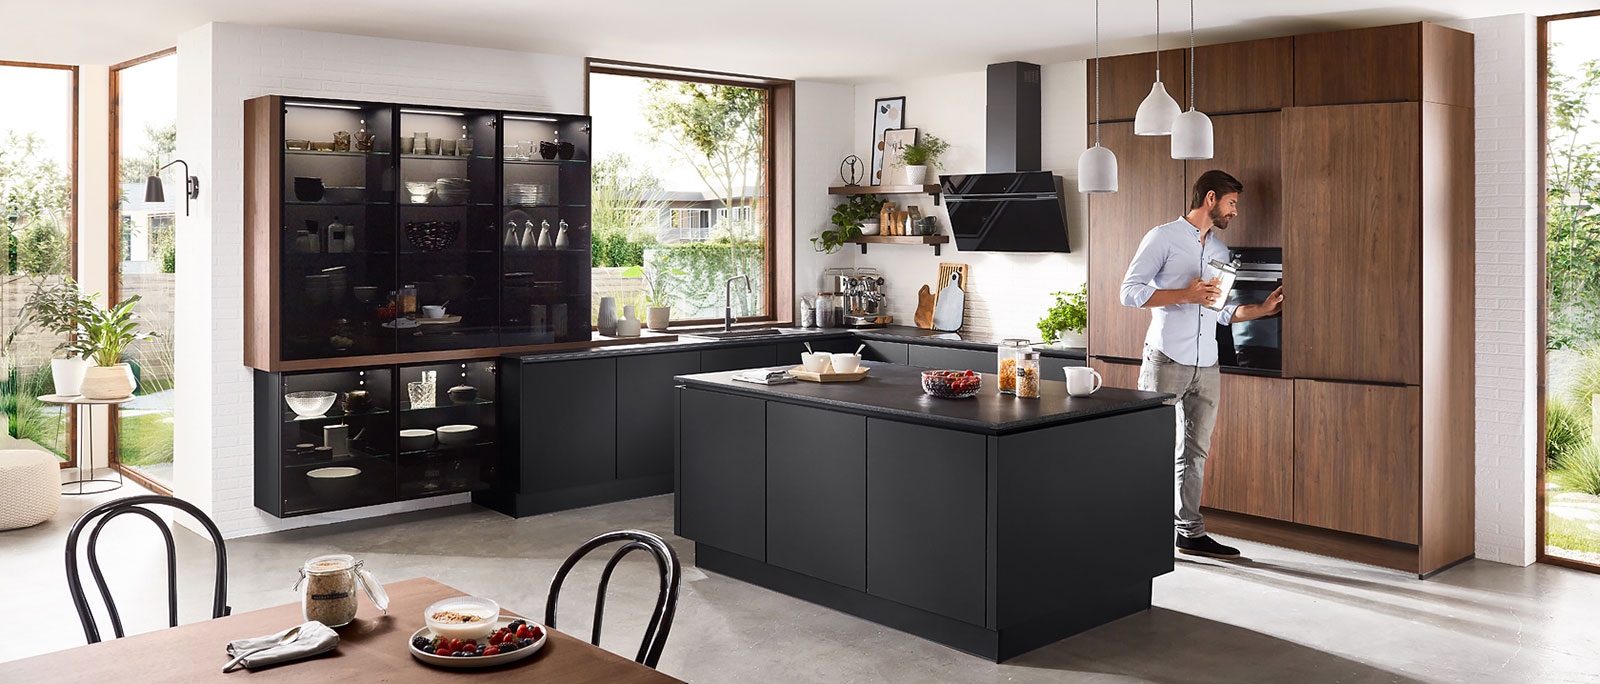 5 Tips to customize designer kitchens to suit individual tastes and preferences